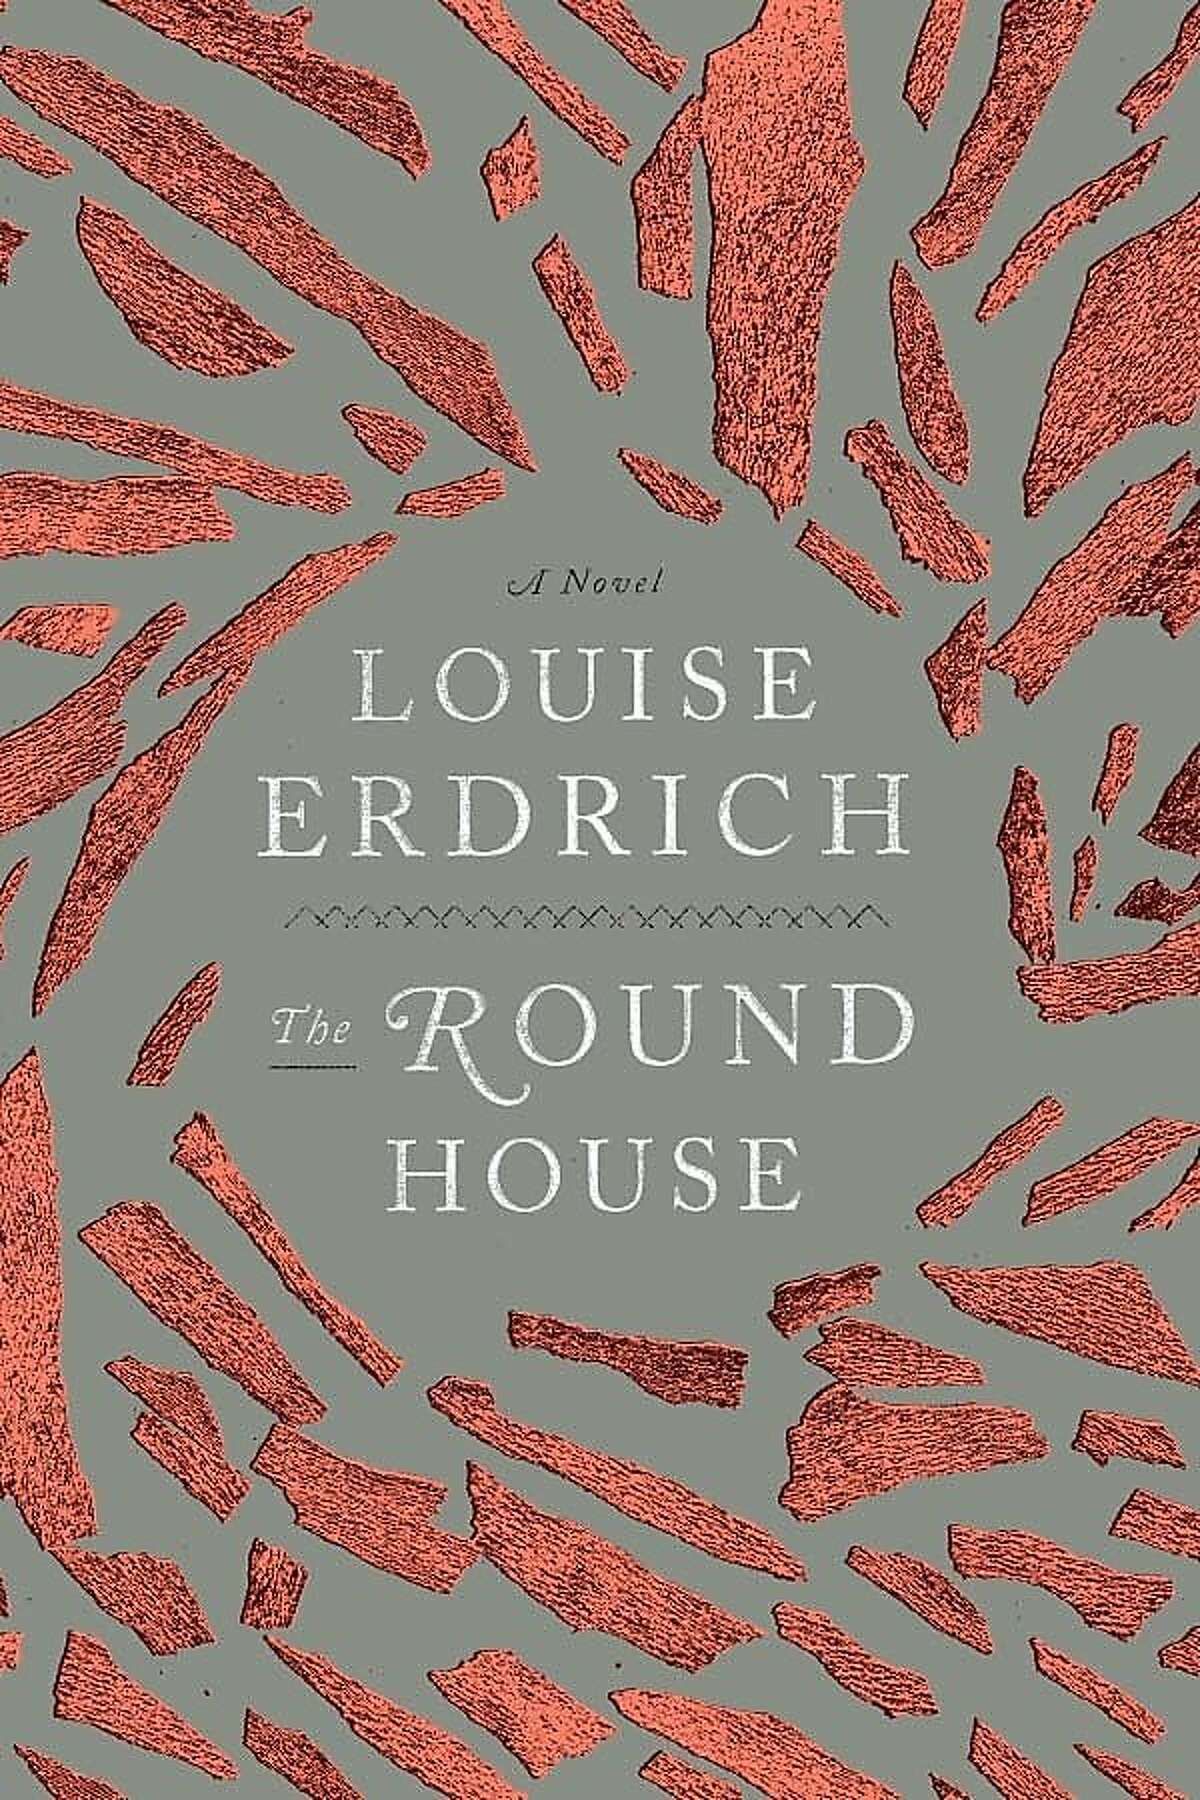 book the round house by louise erdrich